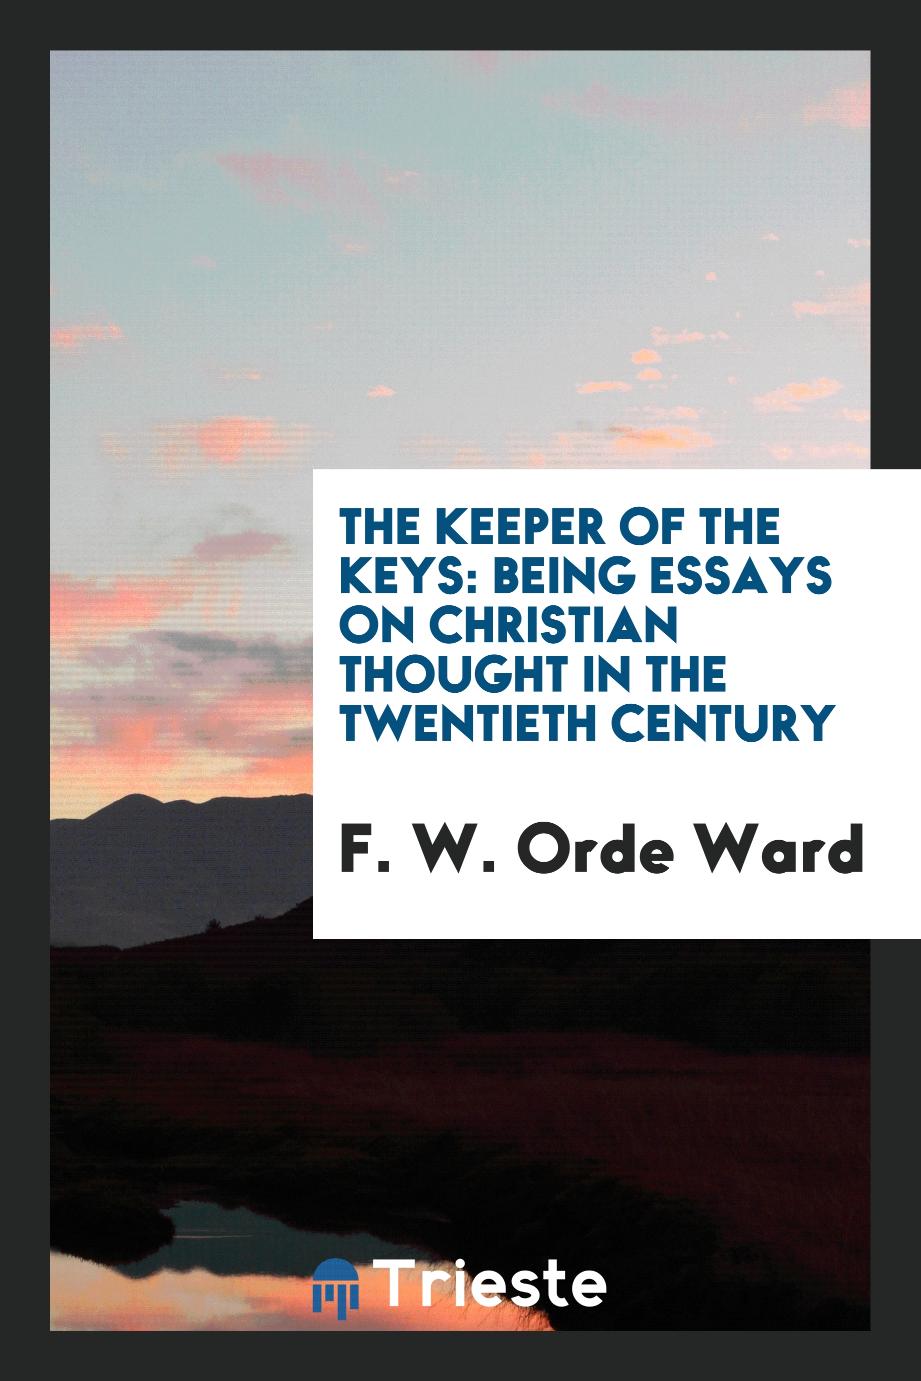 The Keeper of the Keys: Being Essays on Christian Thought in the Twentieth Century